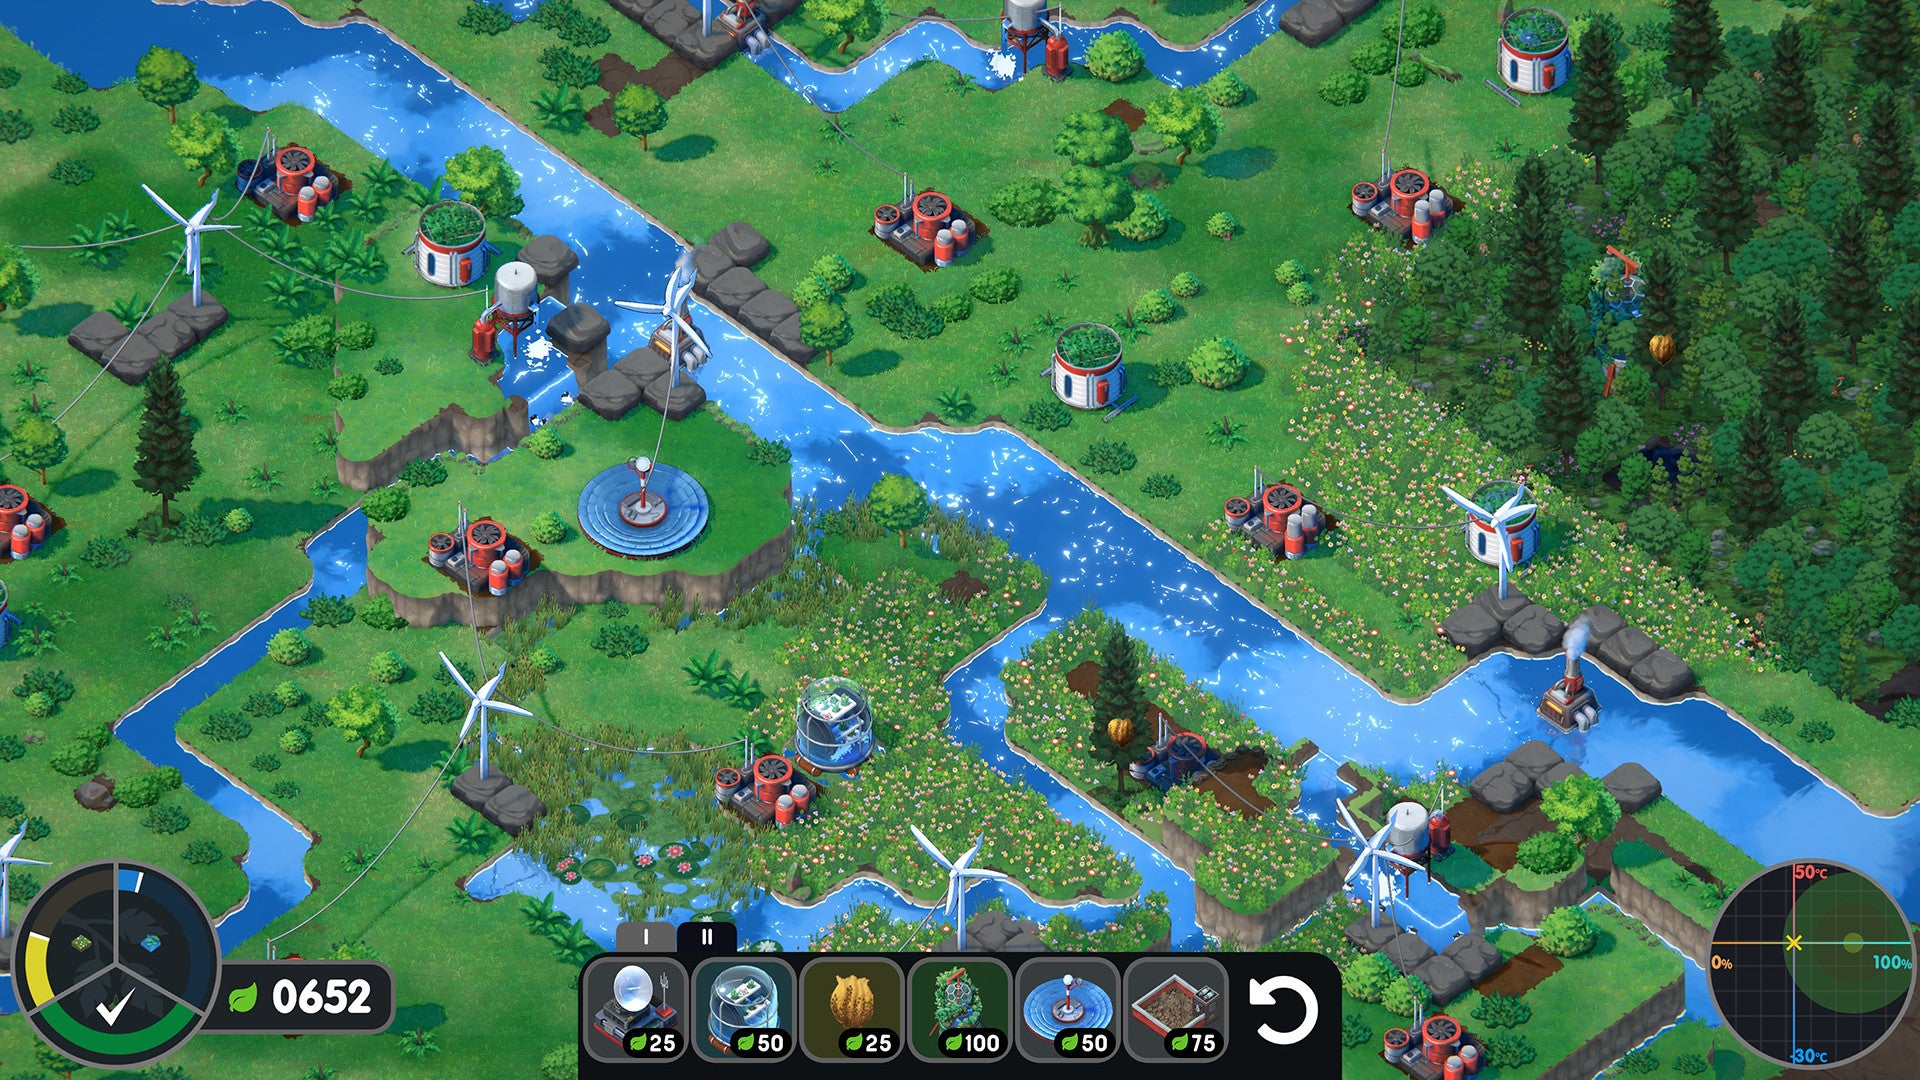 Terra Nil - Isometric view of a green and grassy environment full of rivers with wind turbines and water purifiers built on the landscape.